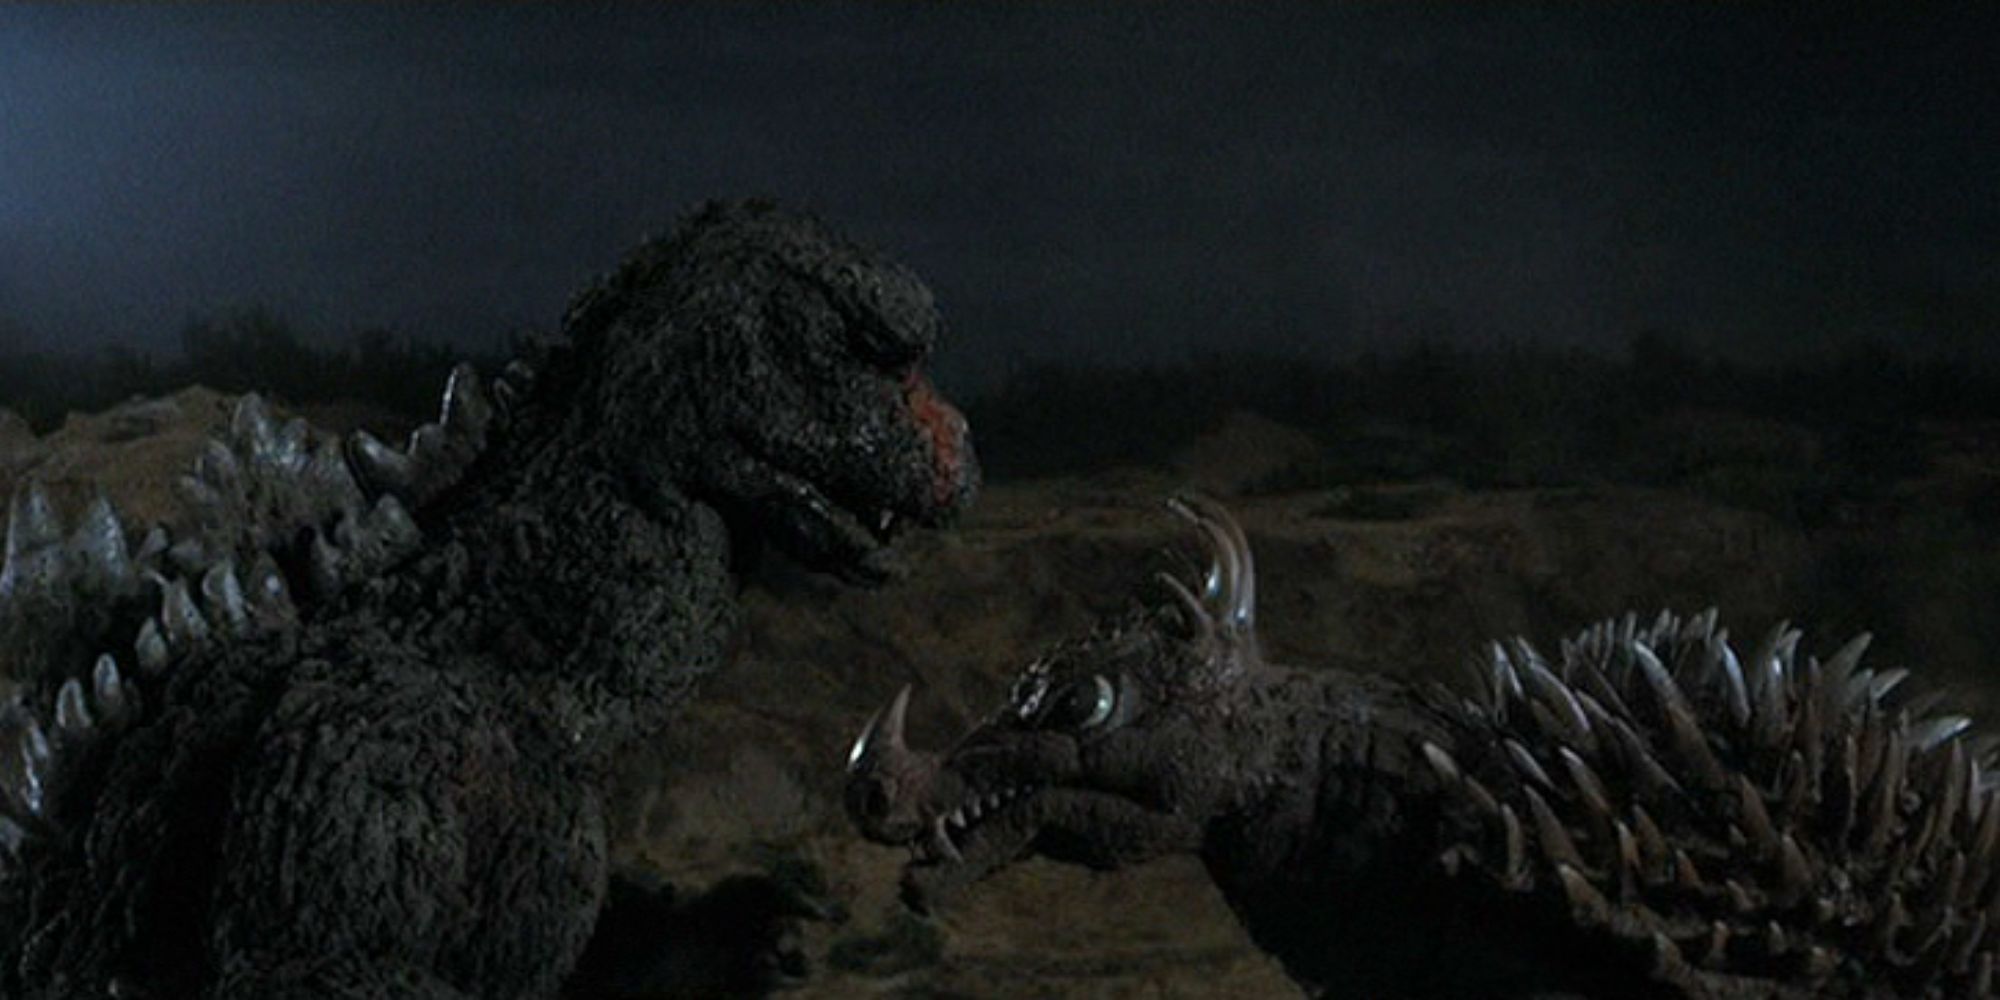 Godzilla and Anguirus talking to each other during the final battle in Godzilla vs. Gigan